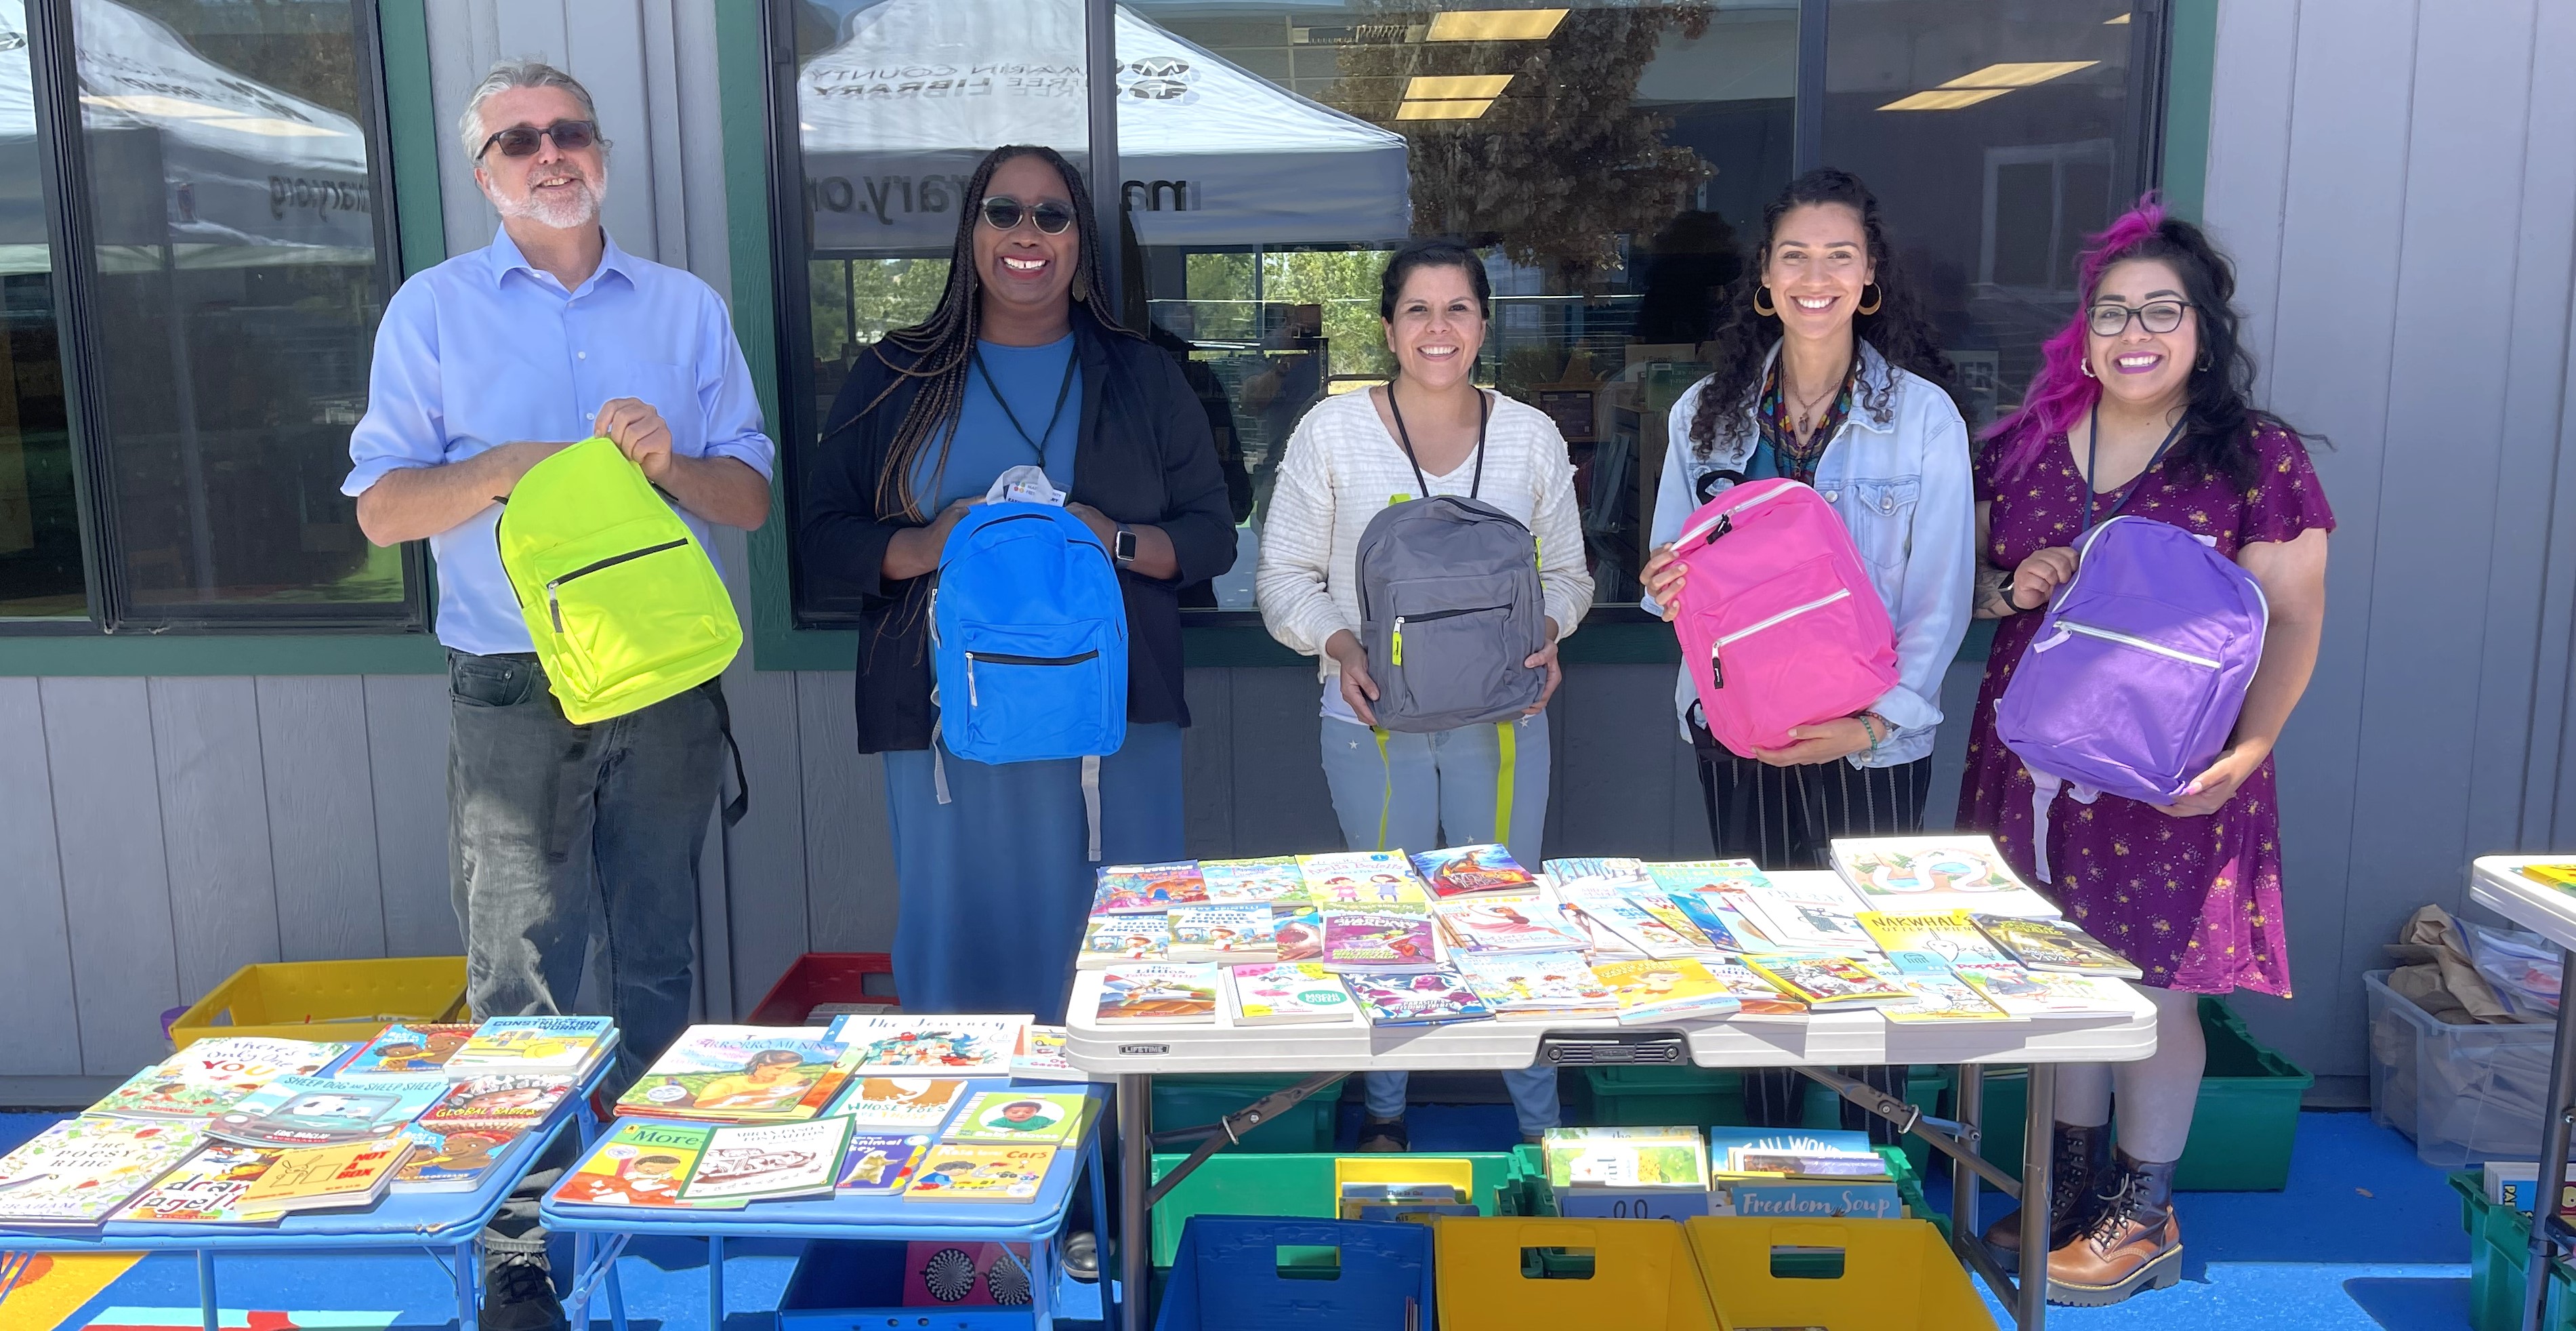 Five library workers smile and pose with children's backpacks to be given away.